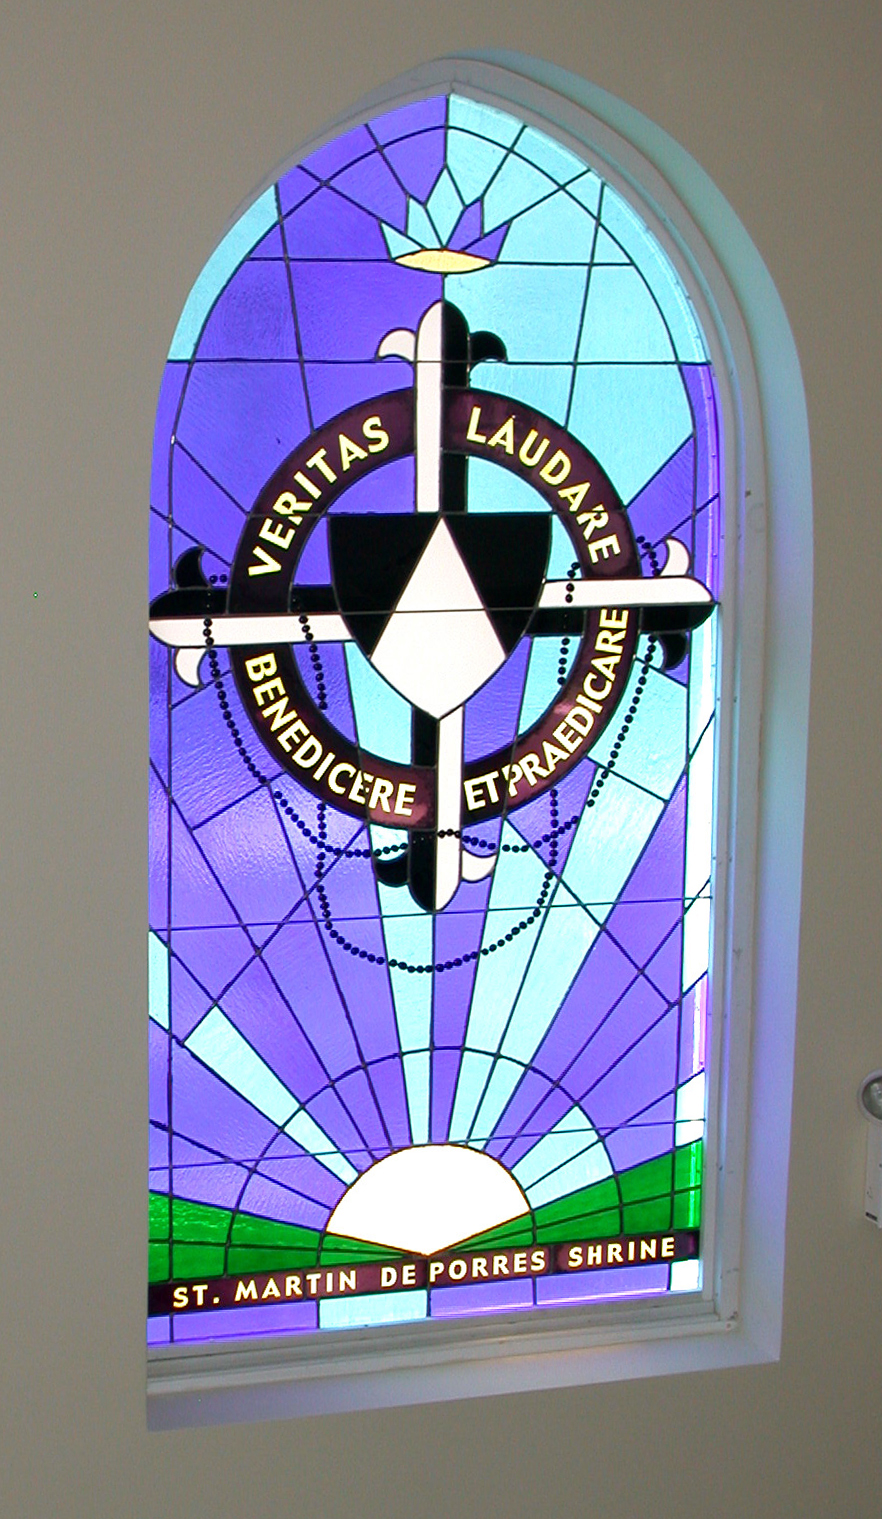  Stained glass window design by Chuck Mitchell  Pro bono work developed for St. Martin de Porres National Shrine &amp; Institute, Memphis  Stained glass window fabrication by Robbie O'Kelly 